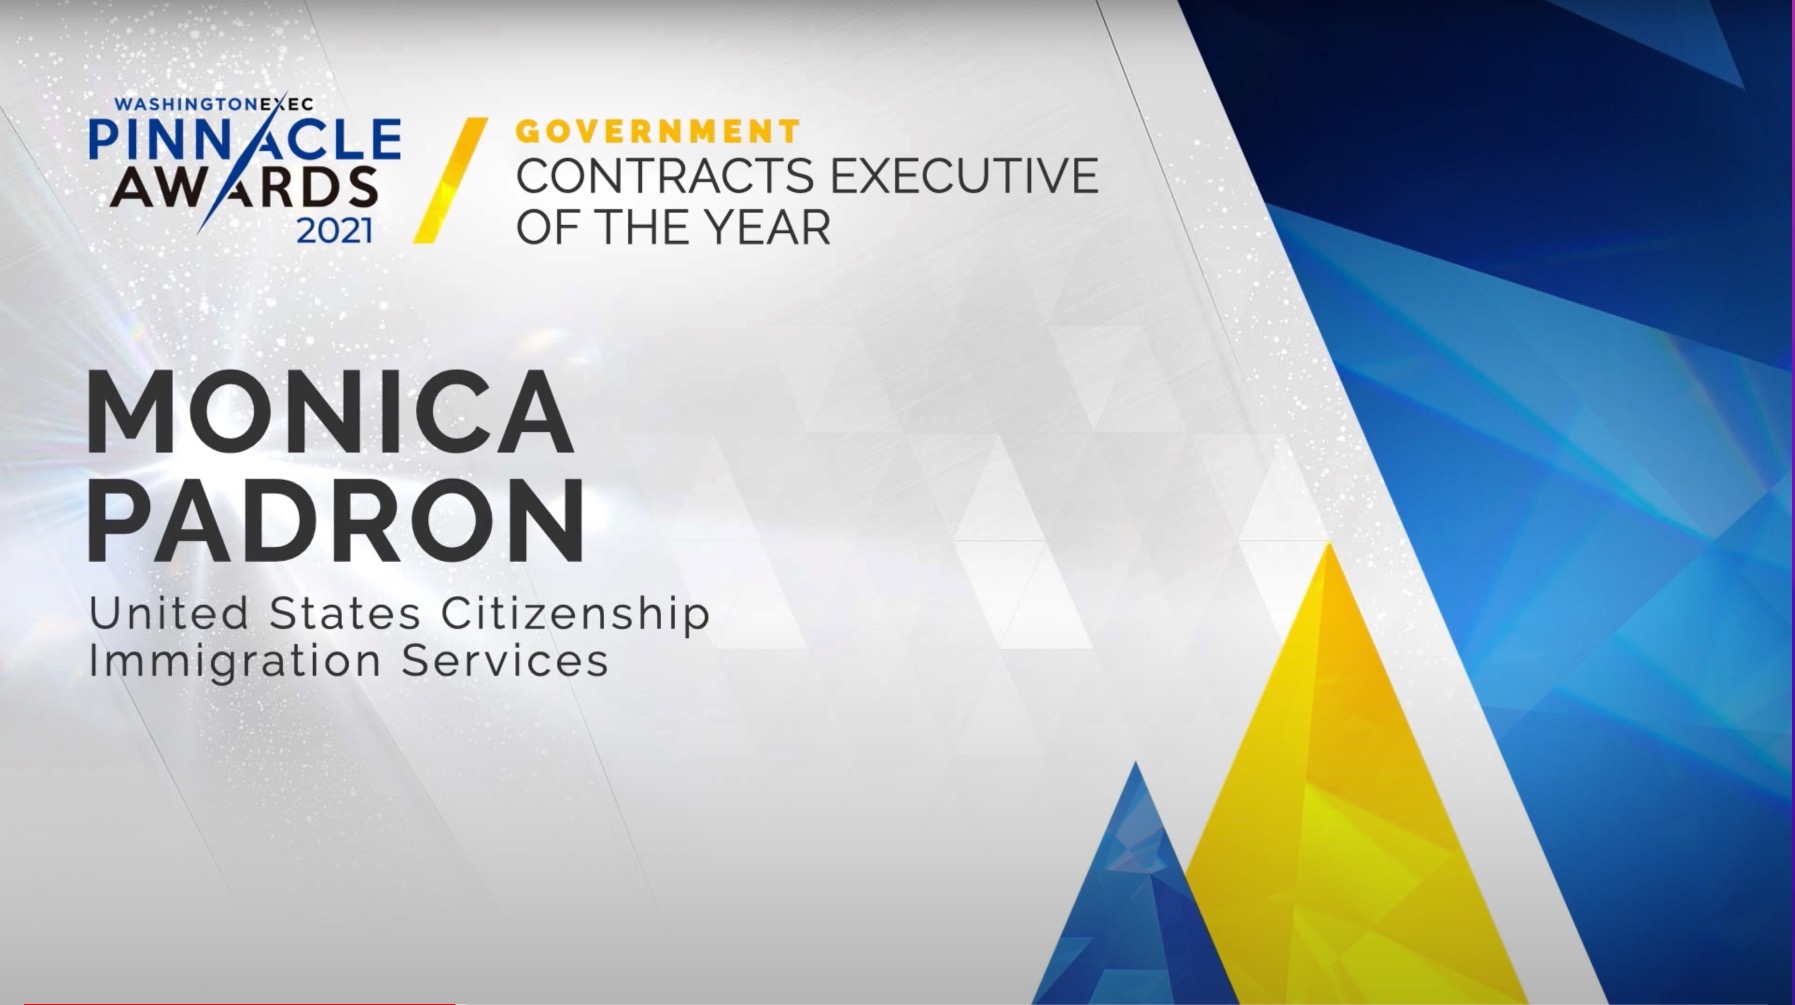 Contracts - Congratulations to Monica Padron from the U.S. Citizenship and Immigration Services on winning the award for Contracts Executive of the Year in the Government Sector